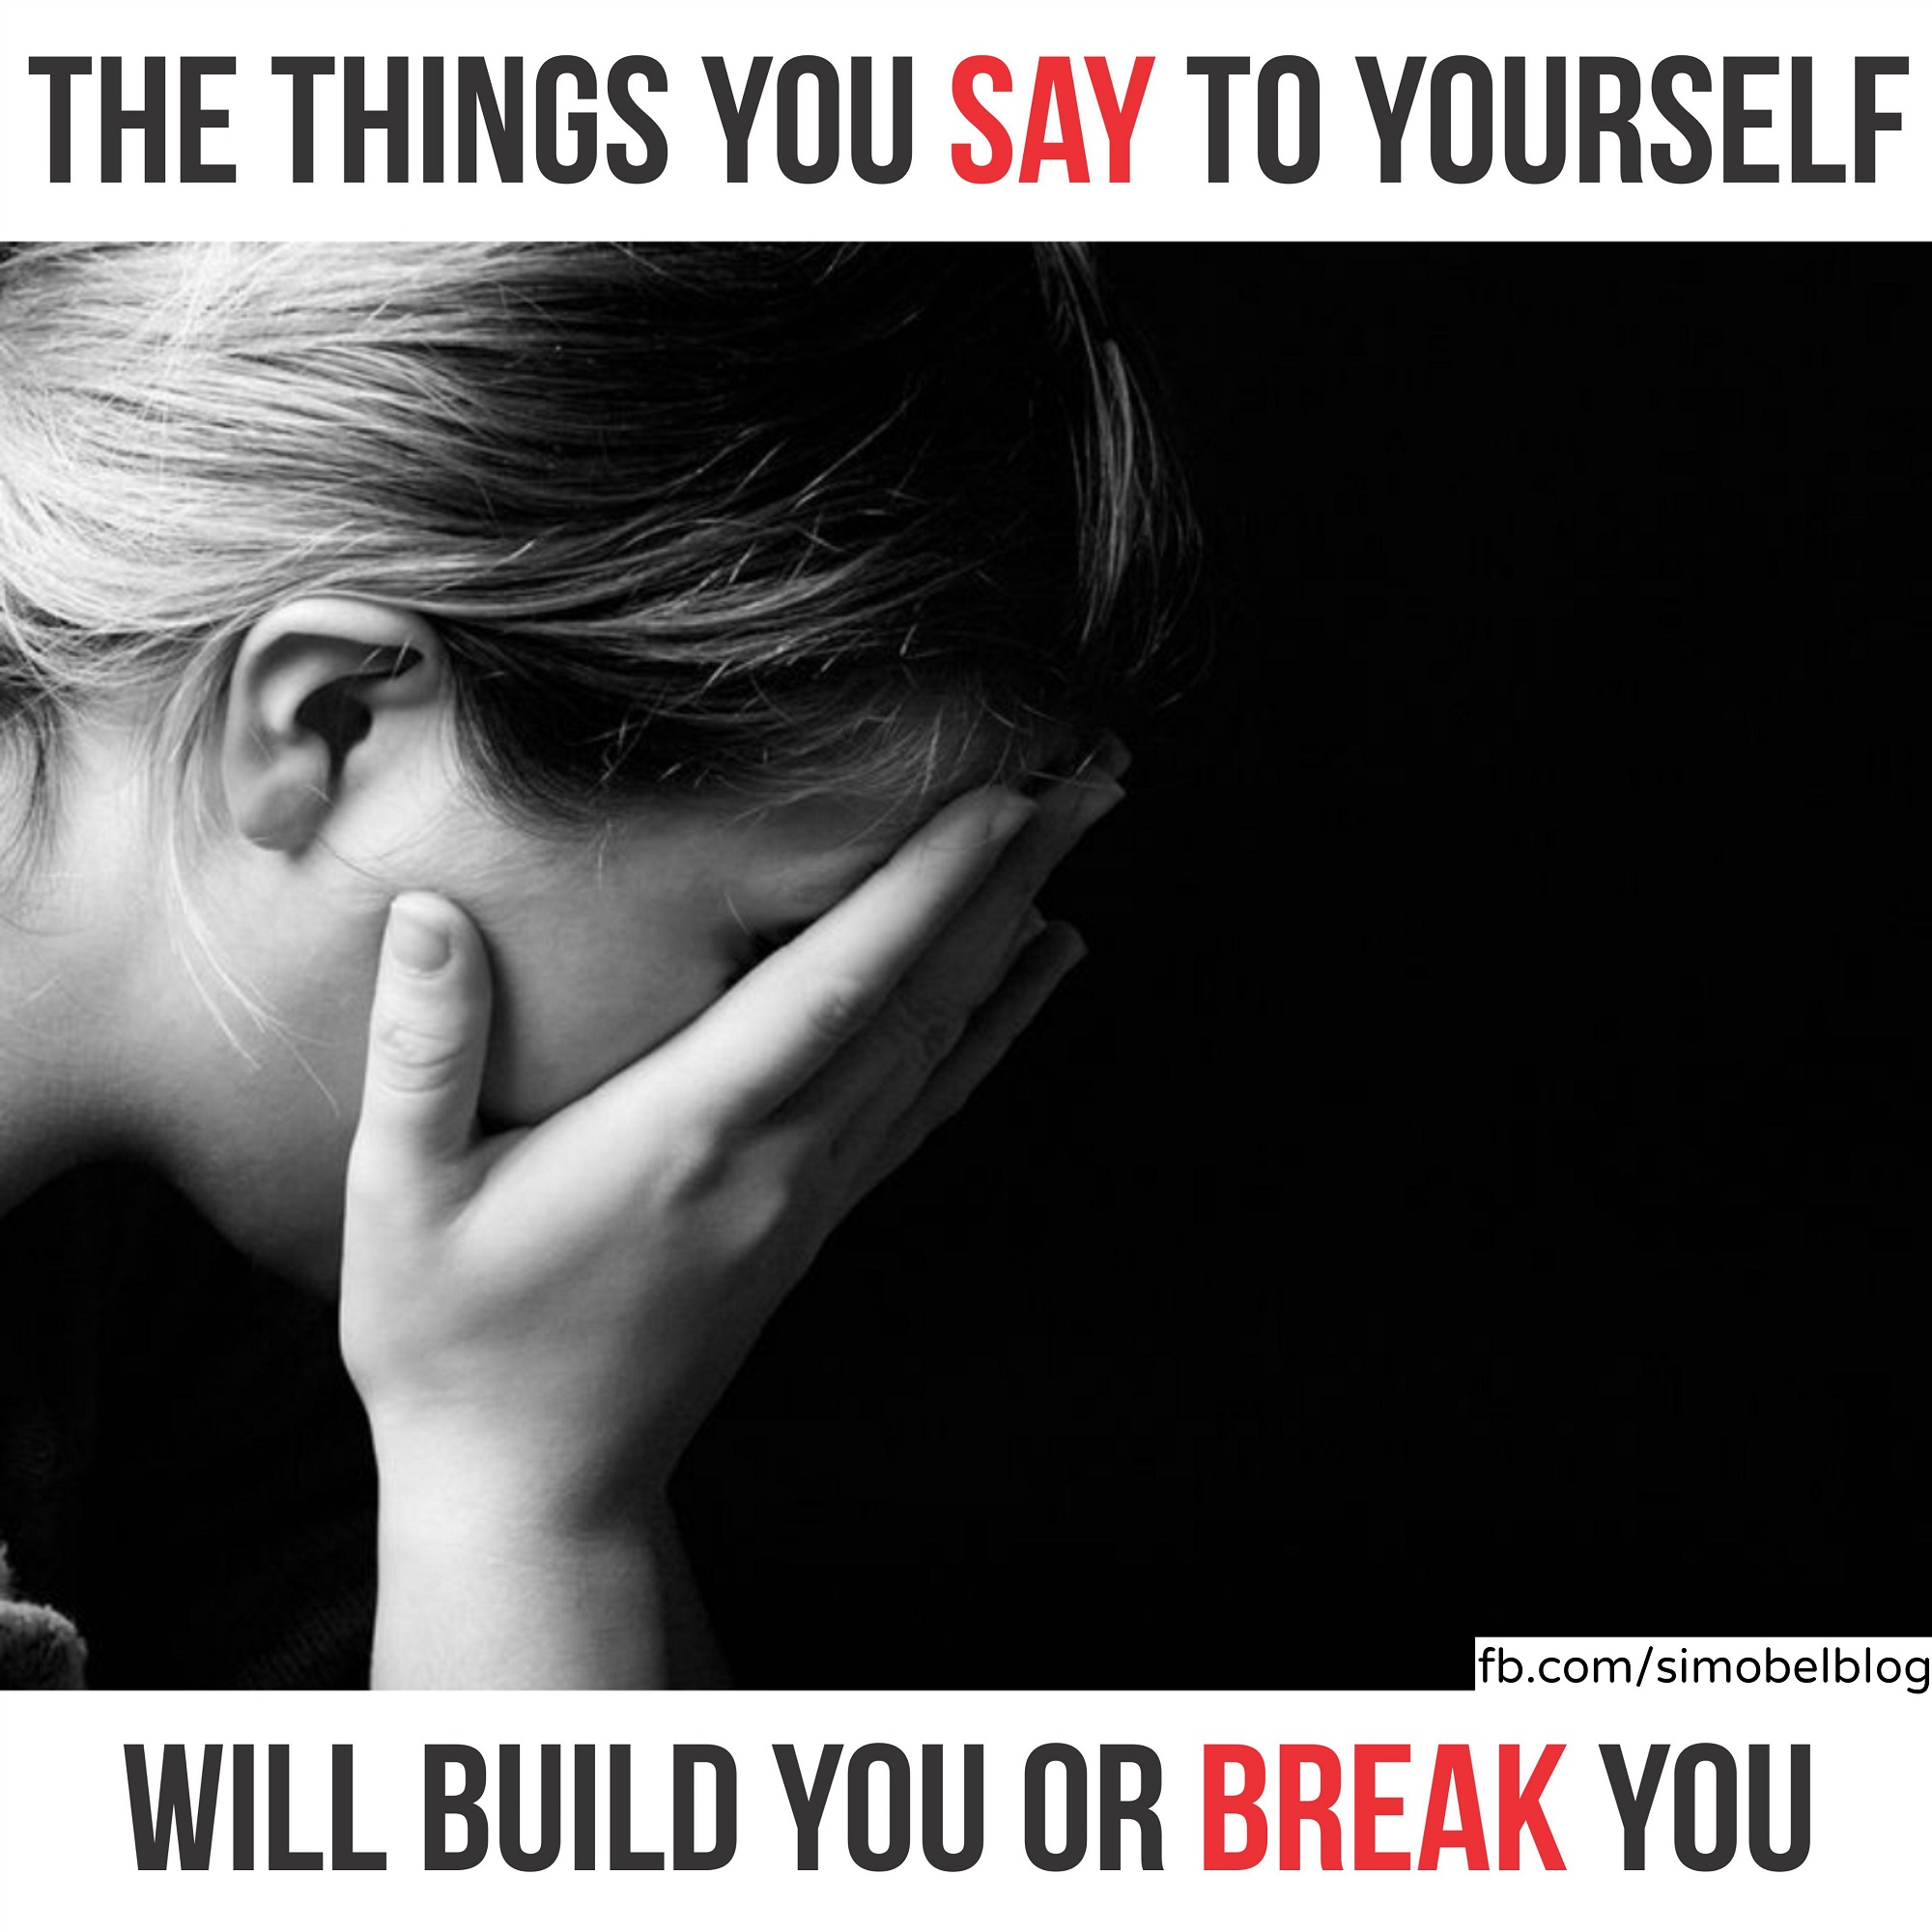 The things you say to yourself will build you or break you